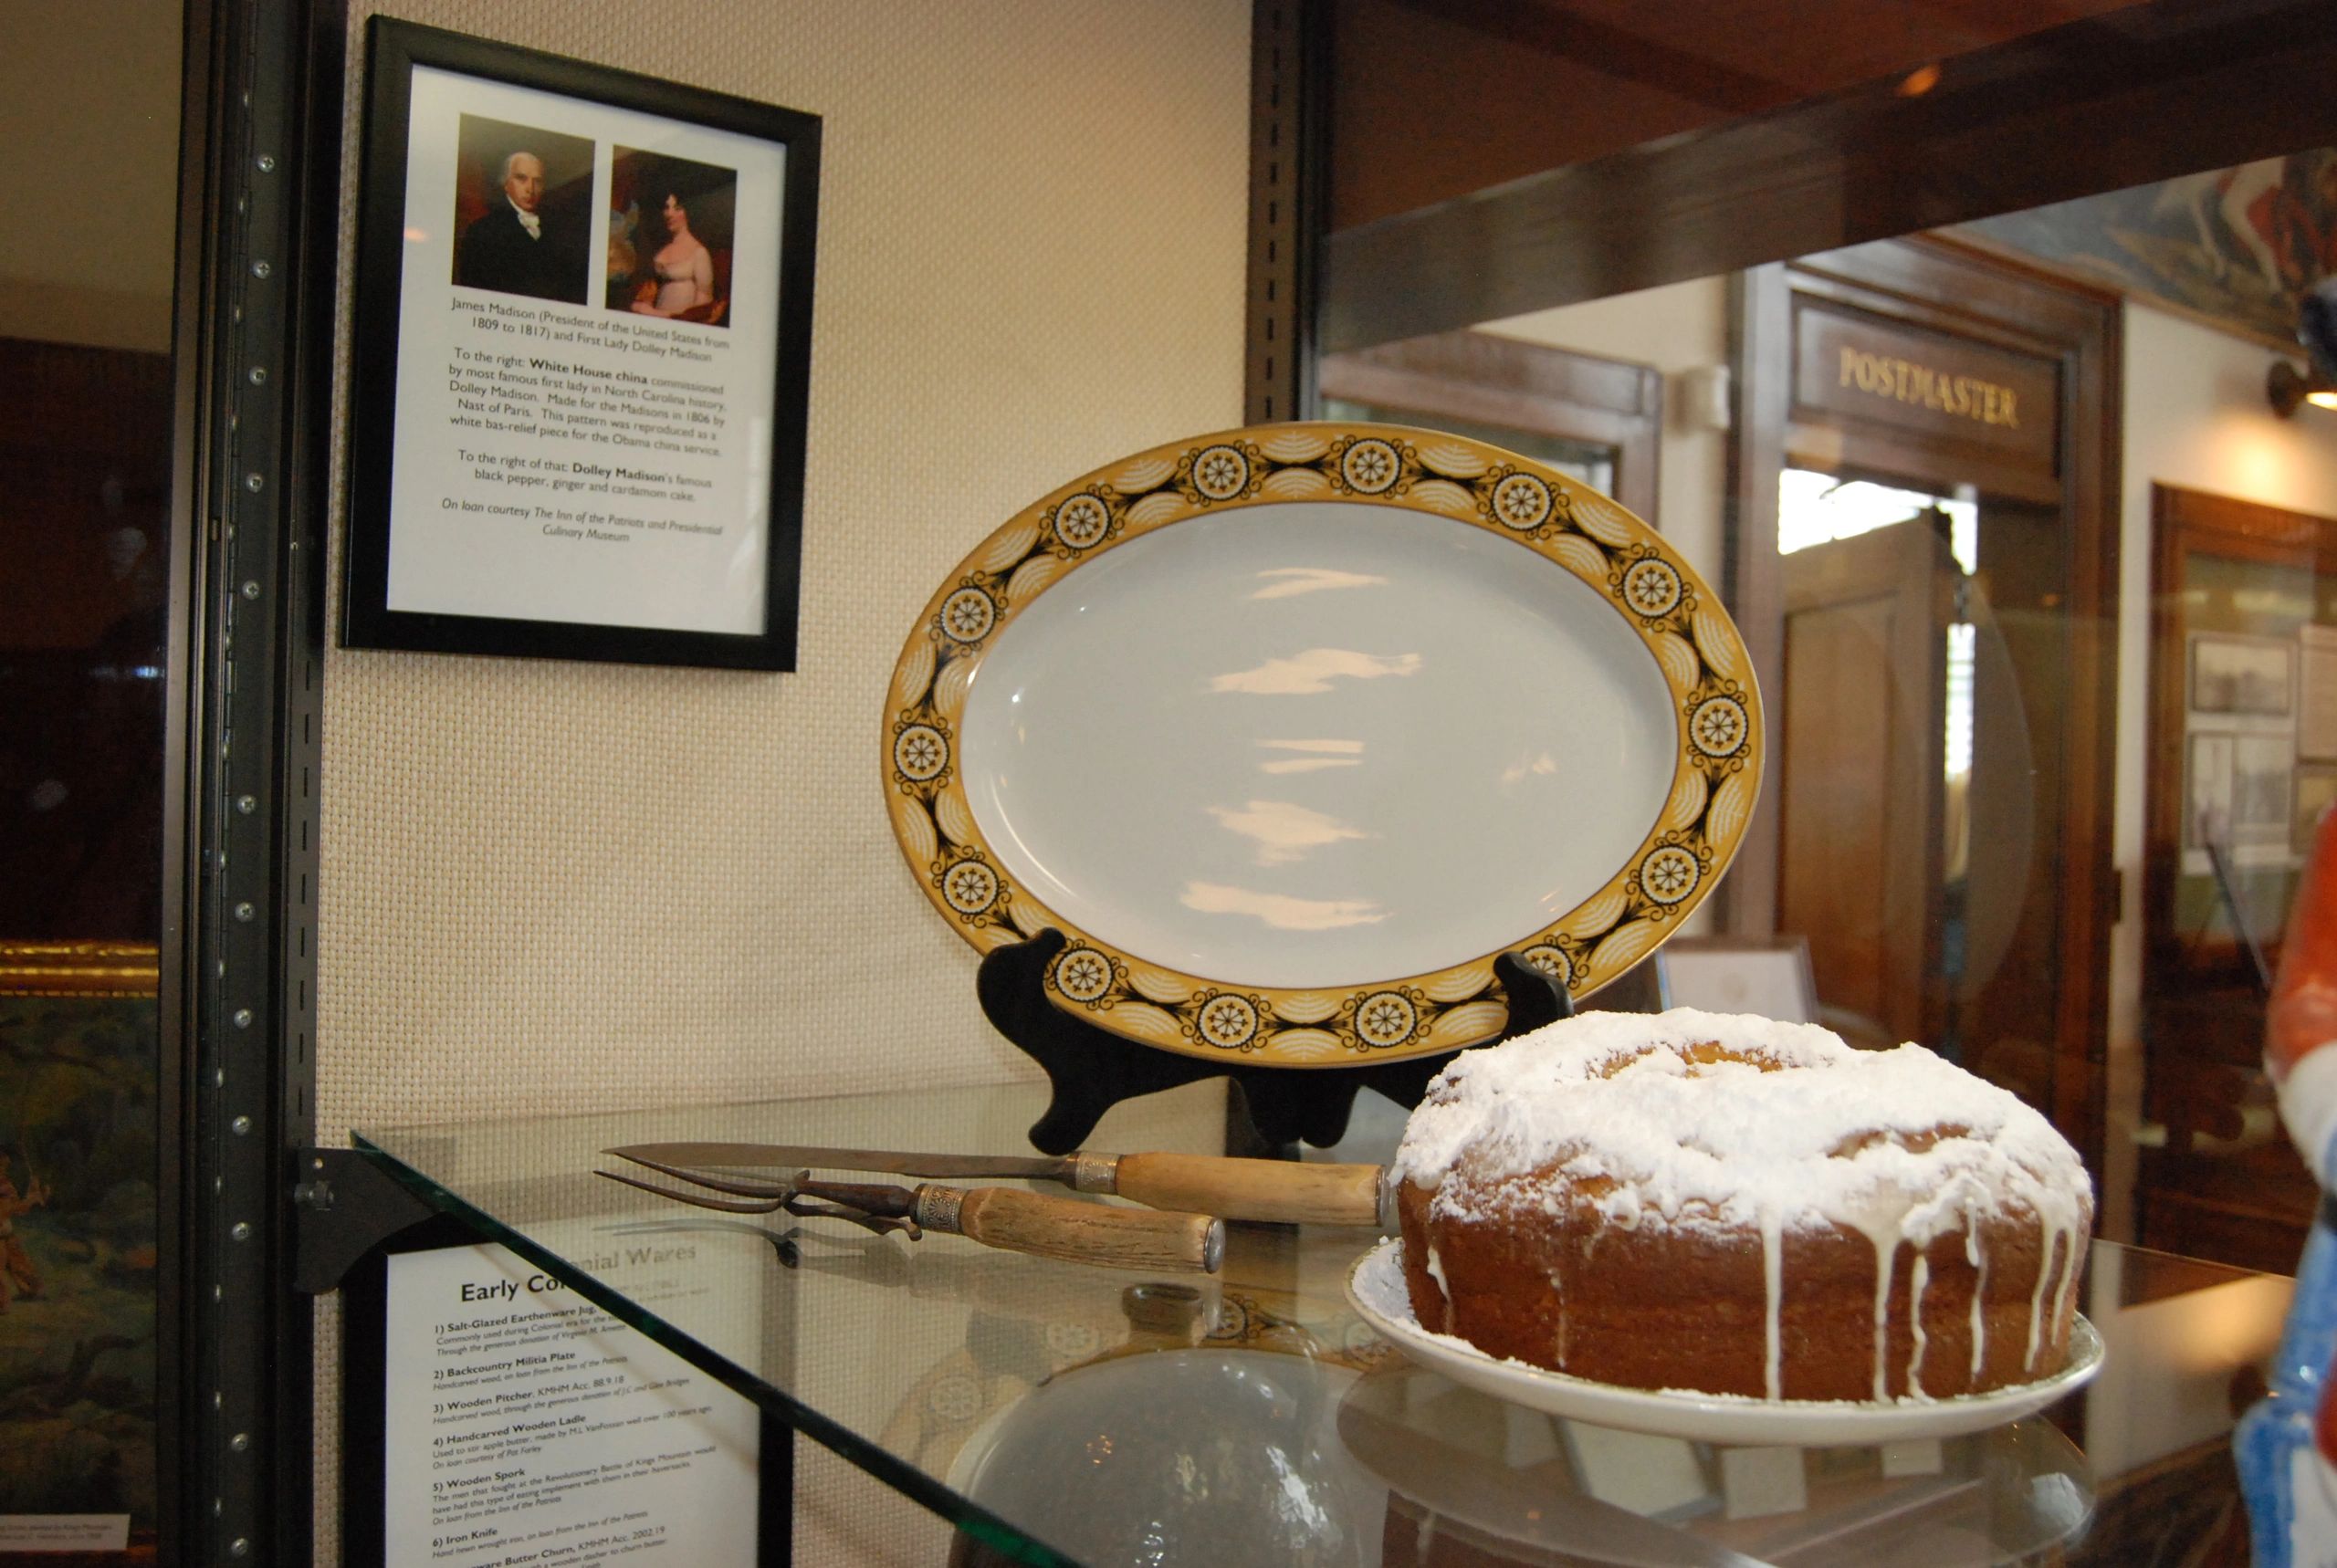 A picture of Dolley Madison's cake on display in a museum glass showcase.